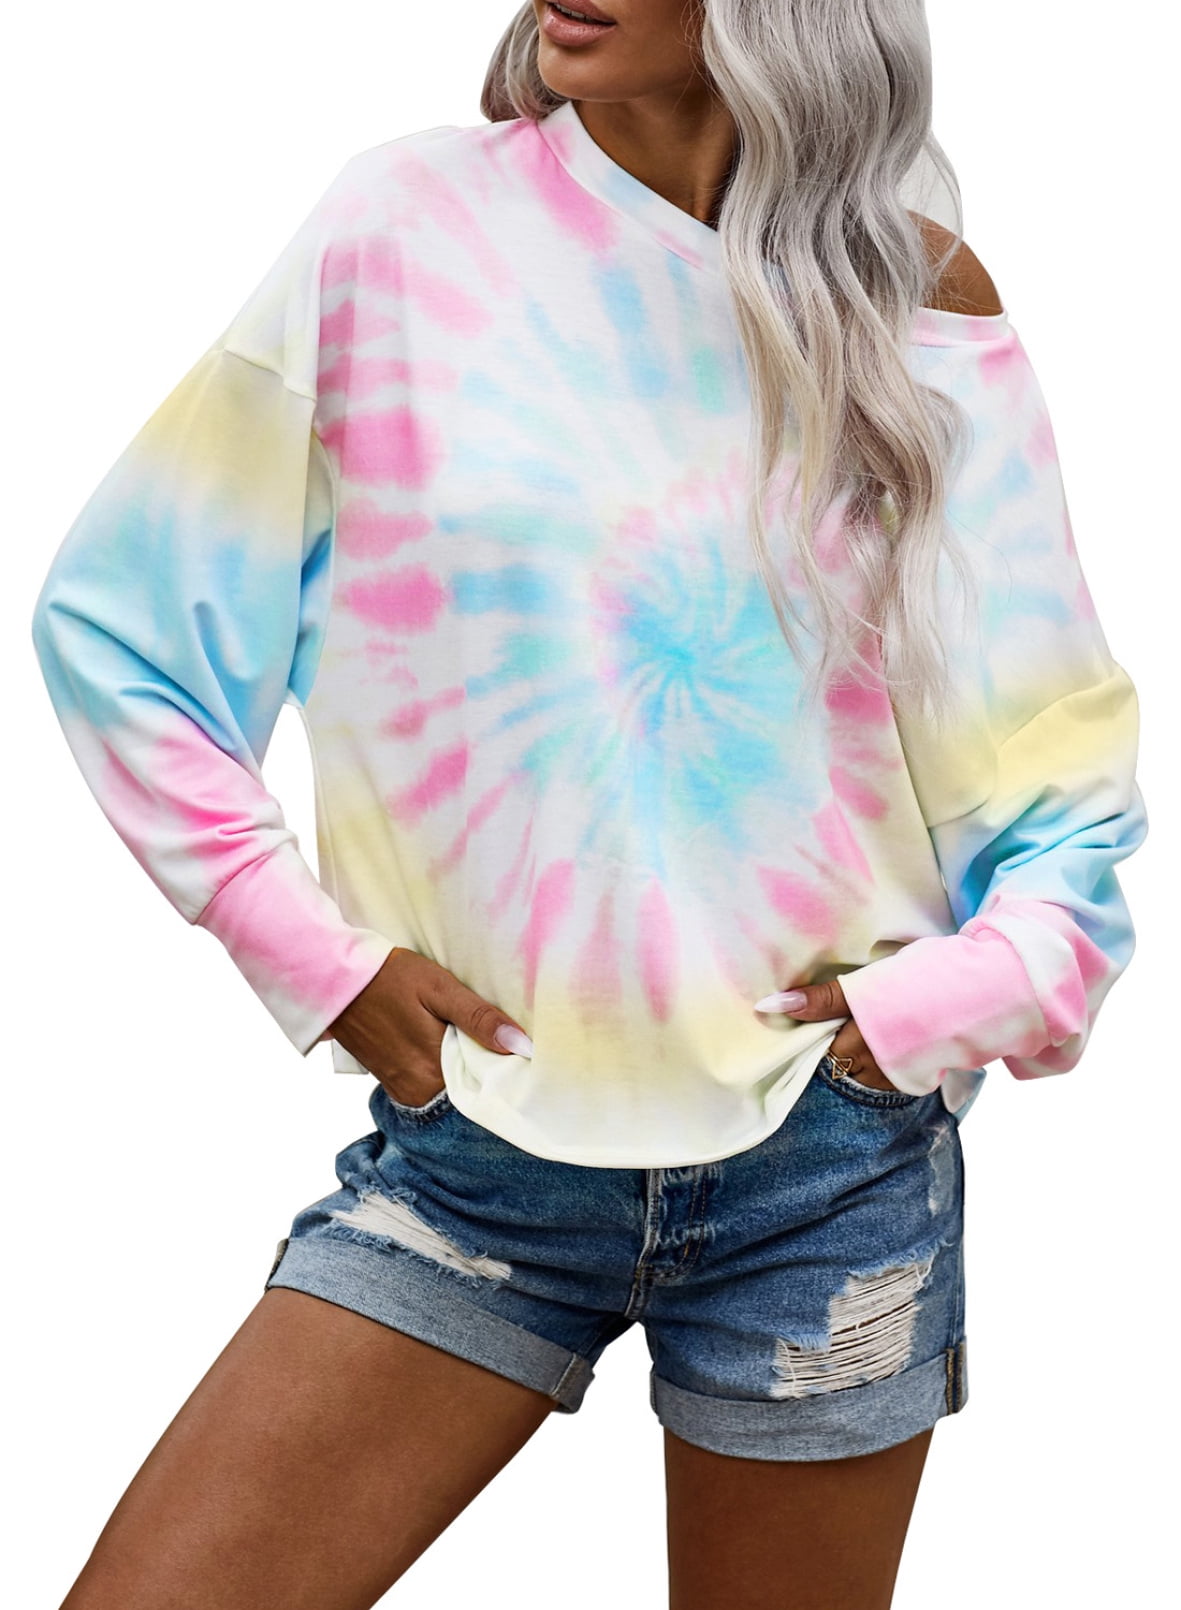 Womens Tie Dye Printed Long Sleeve Sweatshirt Round Neck Casual Loose Pullover Tops Shirts 